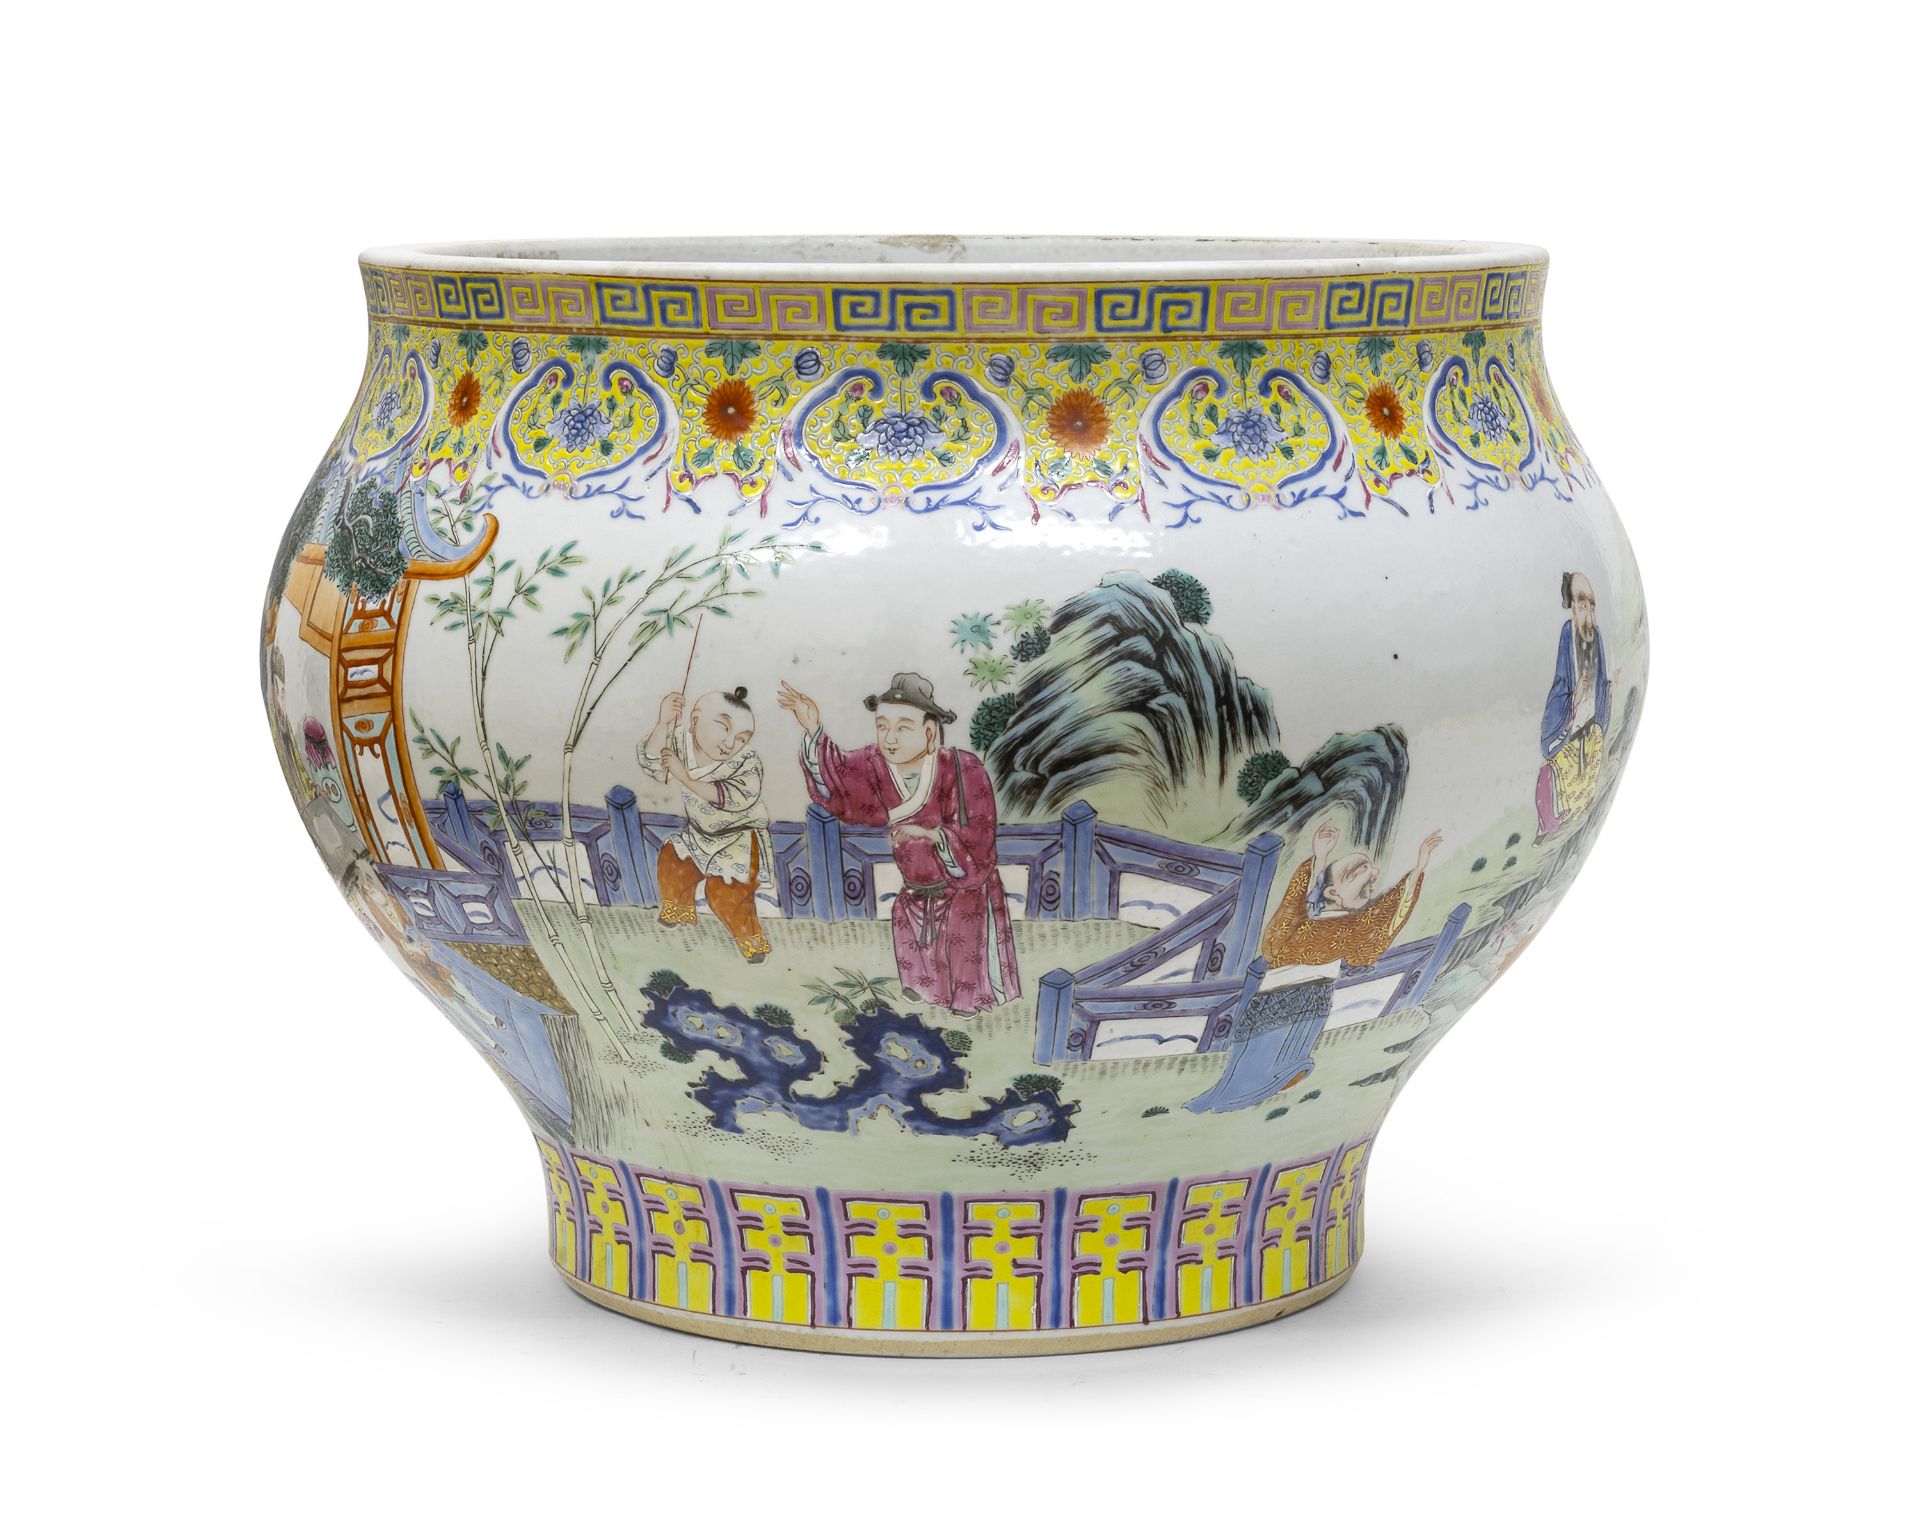 A CHINESE POLYCHROME ENAMELED PORCELAIN CACHEPOT FIRST HALF 20TH CENTURY.